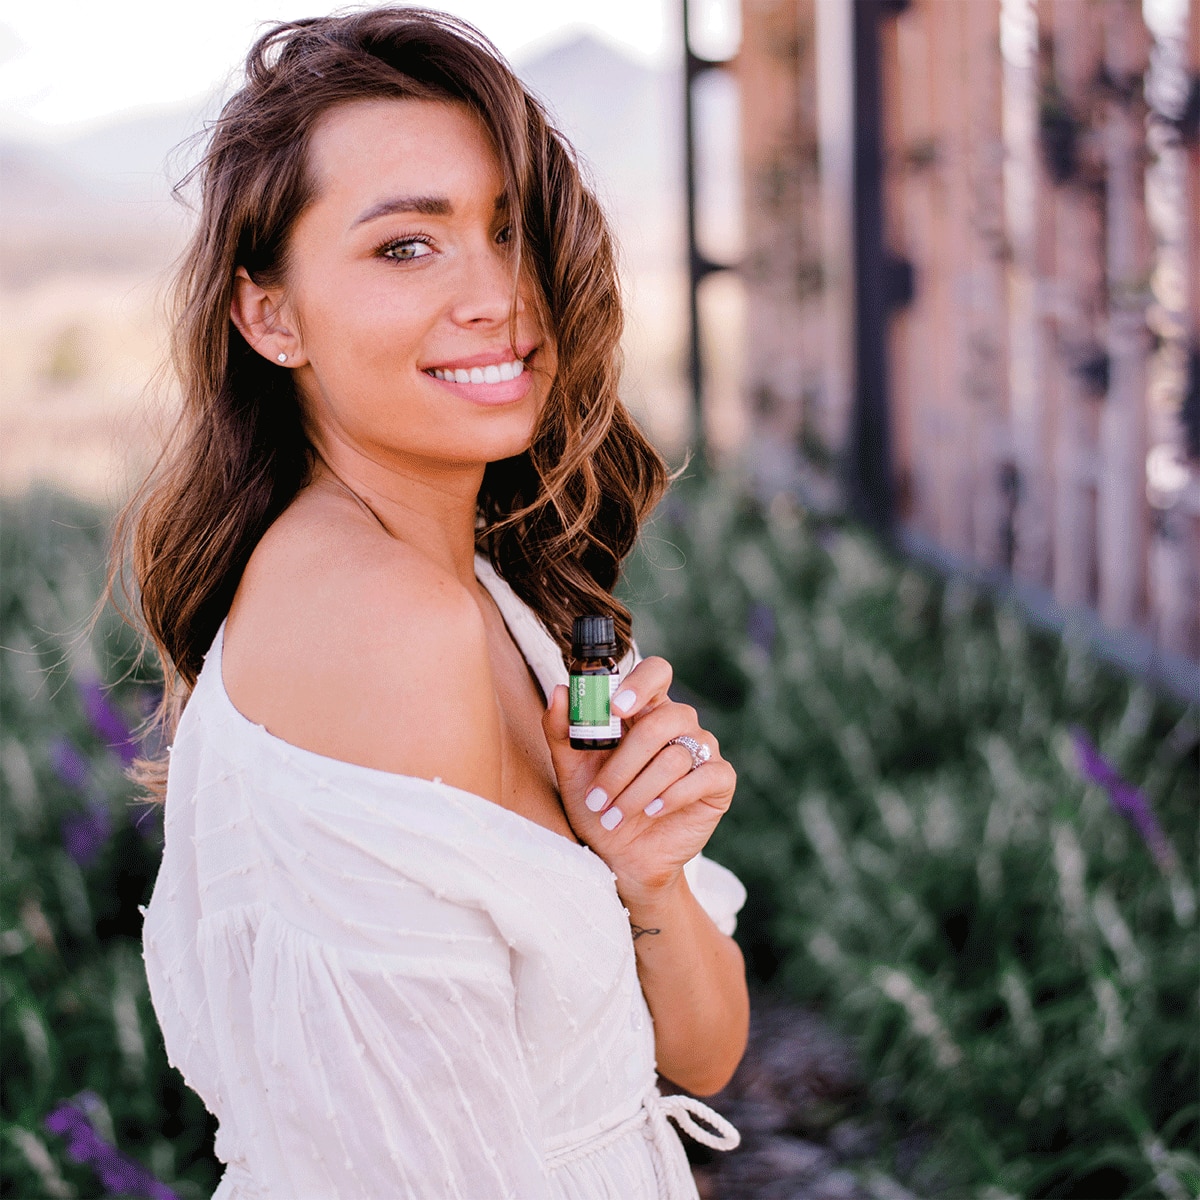 Girll with essential oil in her hand